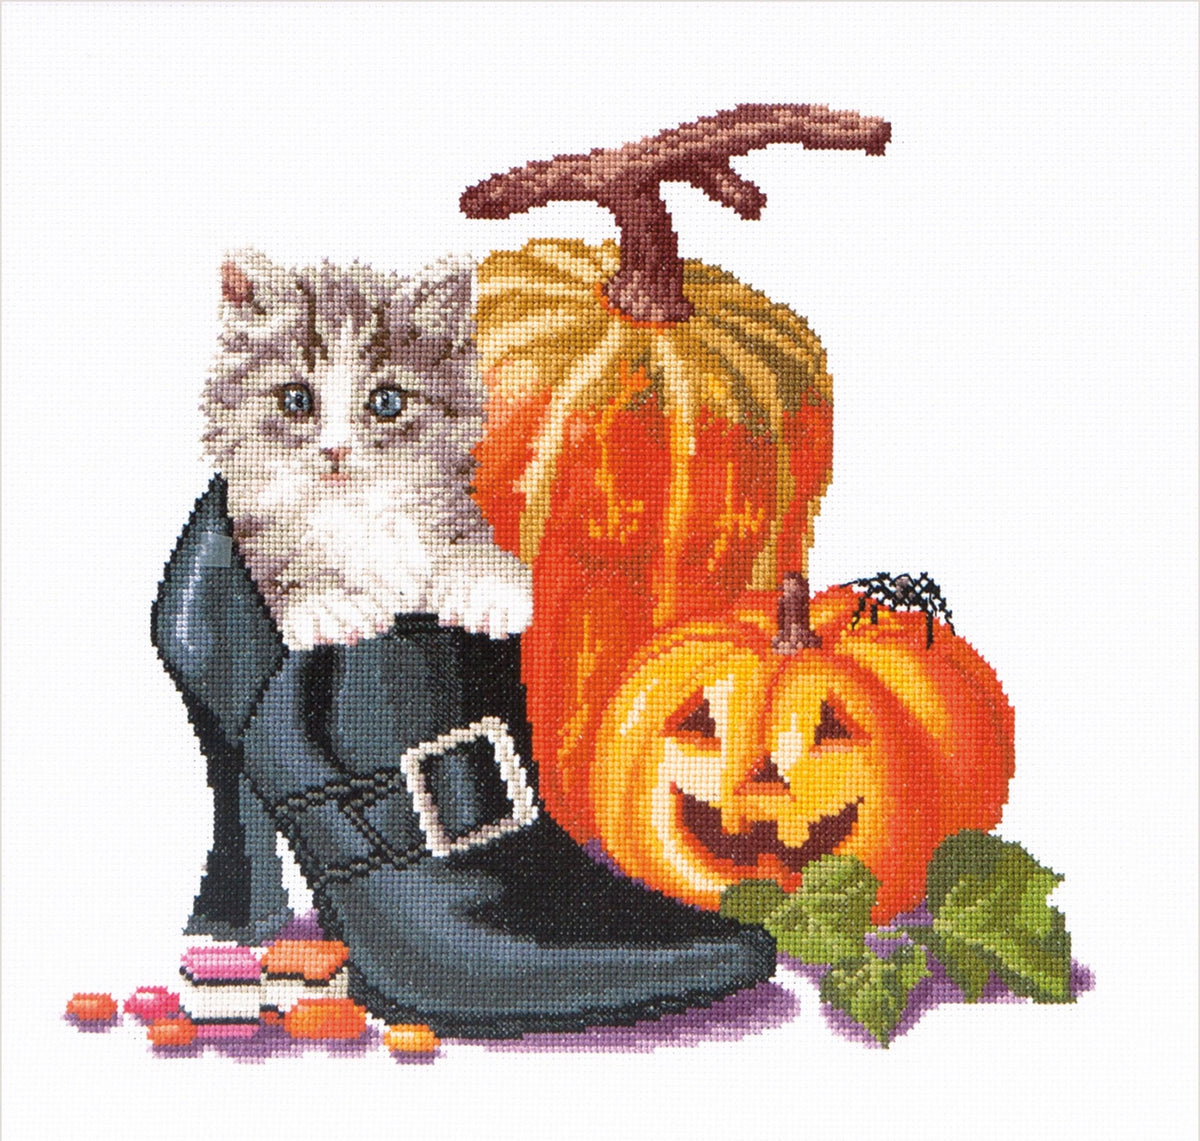 Thea Gouverneur - Counted Cross Stitch Kit - Halloween Kitten - Aida - 16 count - 738A - Thea Gouverneur Since 1959